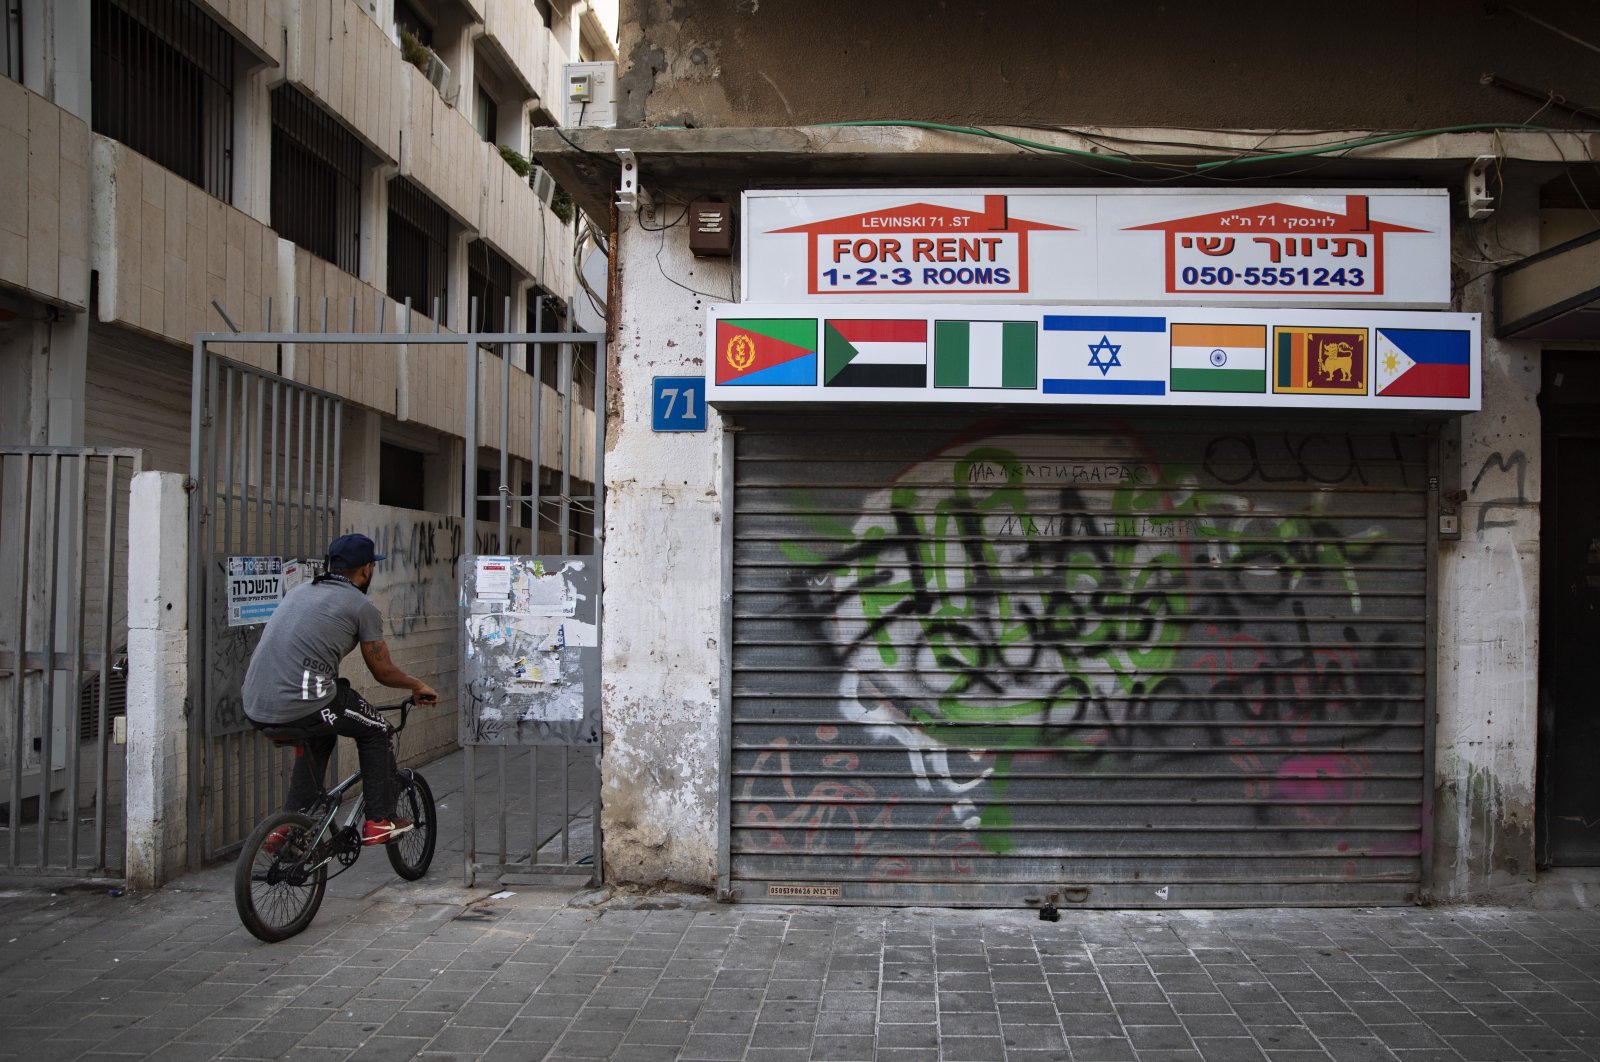 An African migrant rides his bicycle next to a closed real-estate office with the flags of Israel, Sudan and other African countries, in Tel Aviv, Israel, Oct. 23, 2020. (AP Photo)